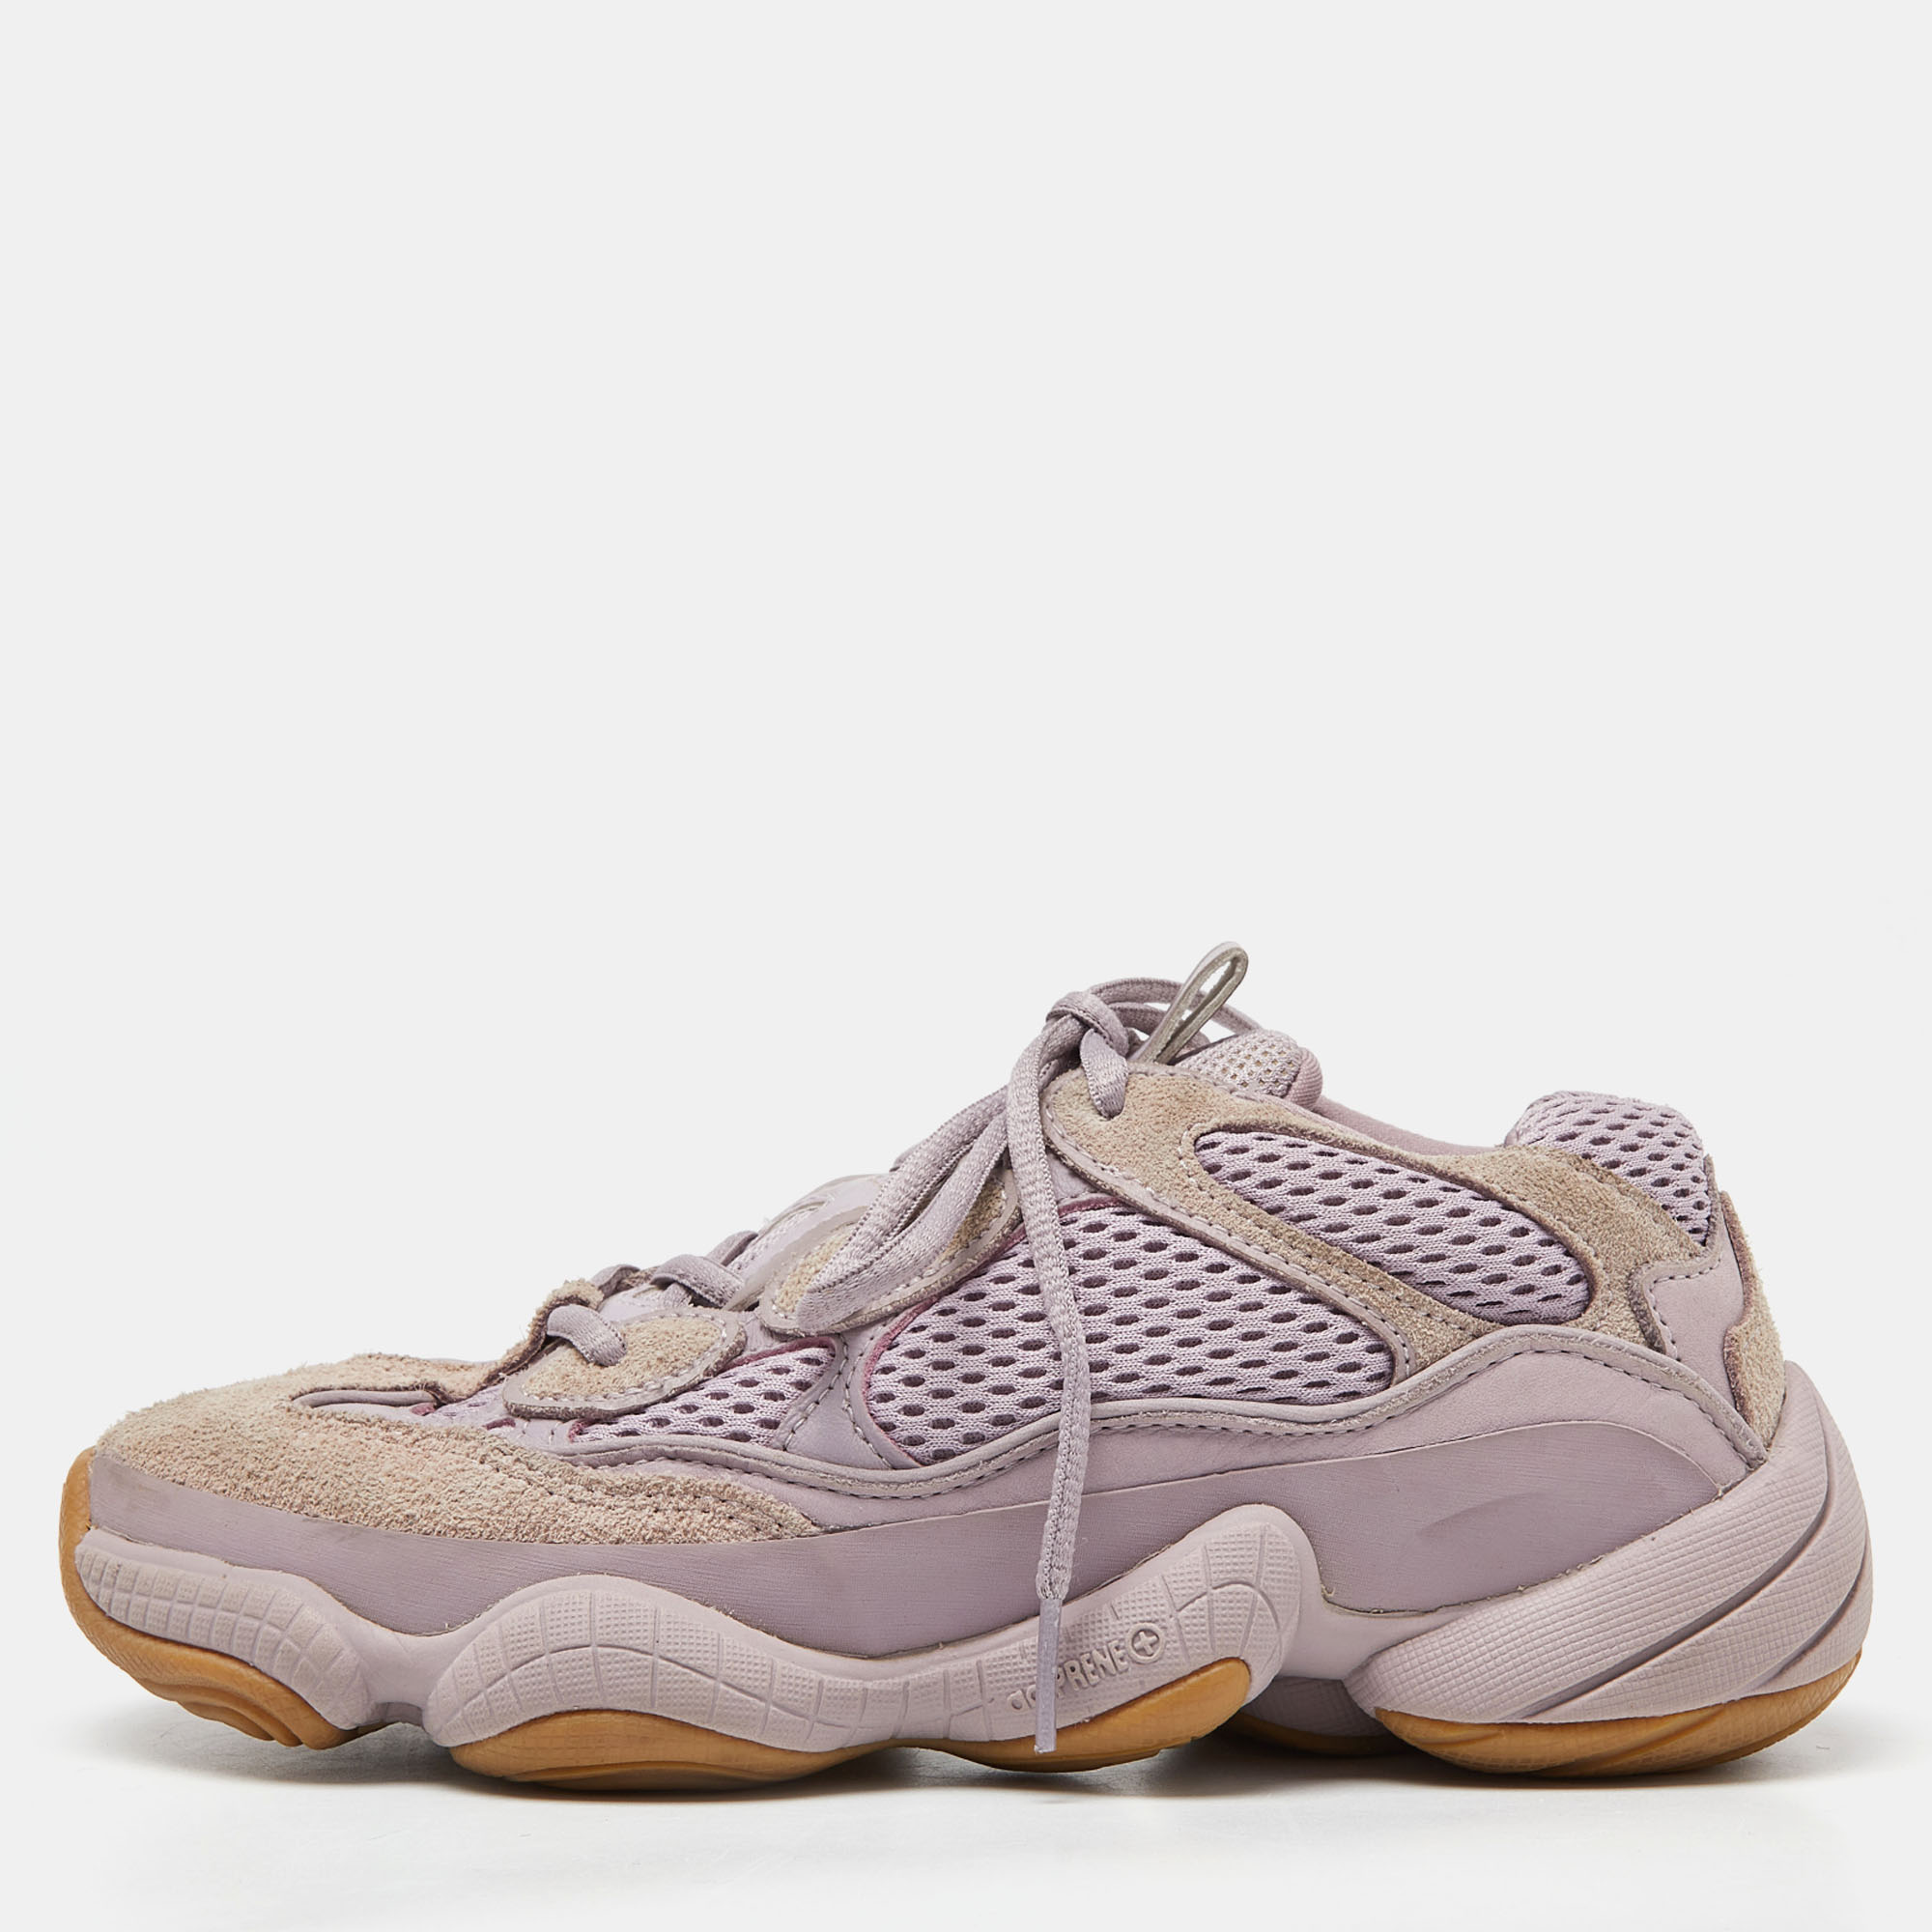 

Adidas x Yeezy Purple Knit Fabric and Suede Boost Yeezy 500 Soft Vision Sneakers Size